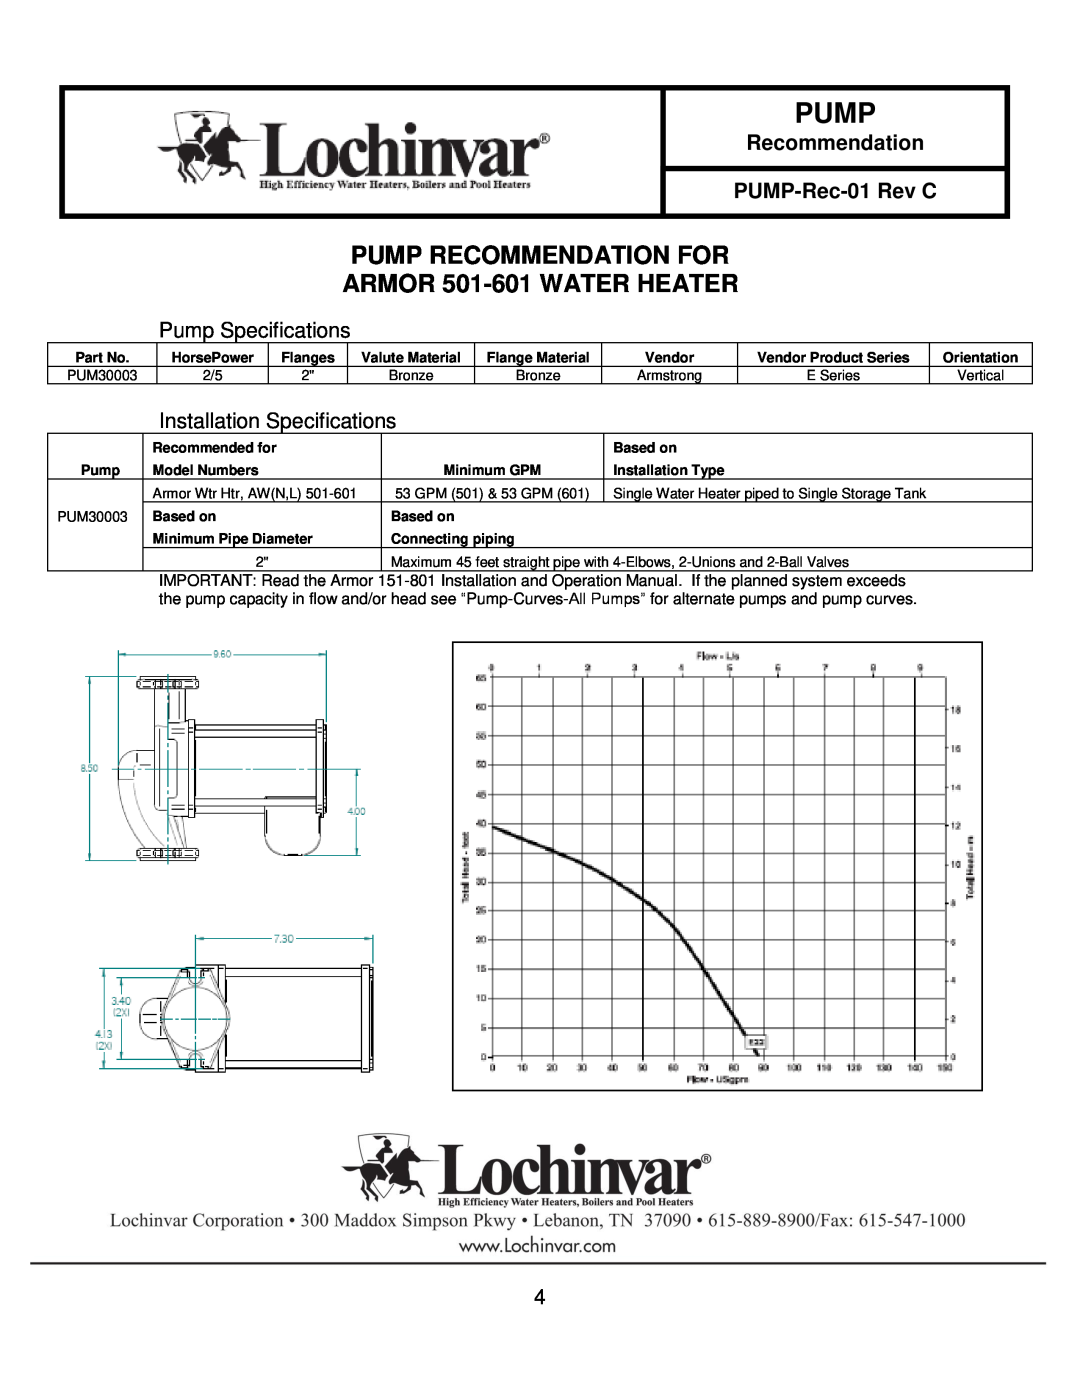 Lochinvar 151-200 ARMOR 501-601WATER HEATER, Pump Recommendation For, Pump Specifications, Installation Specifications 